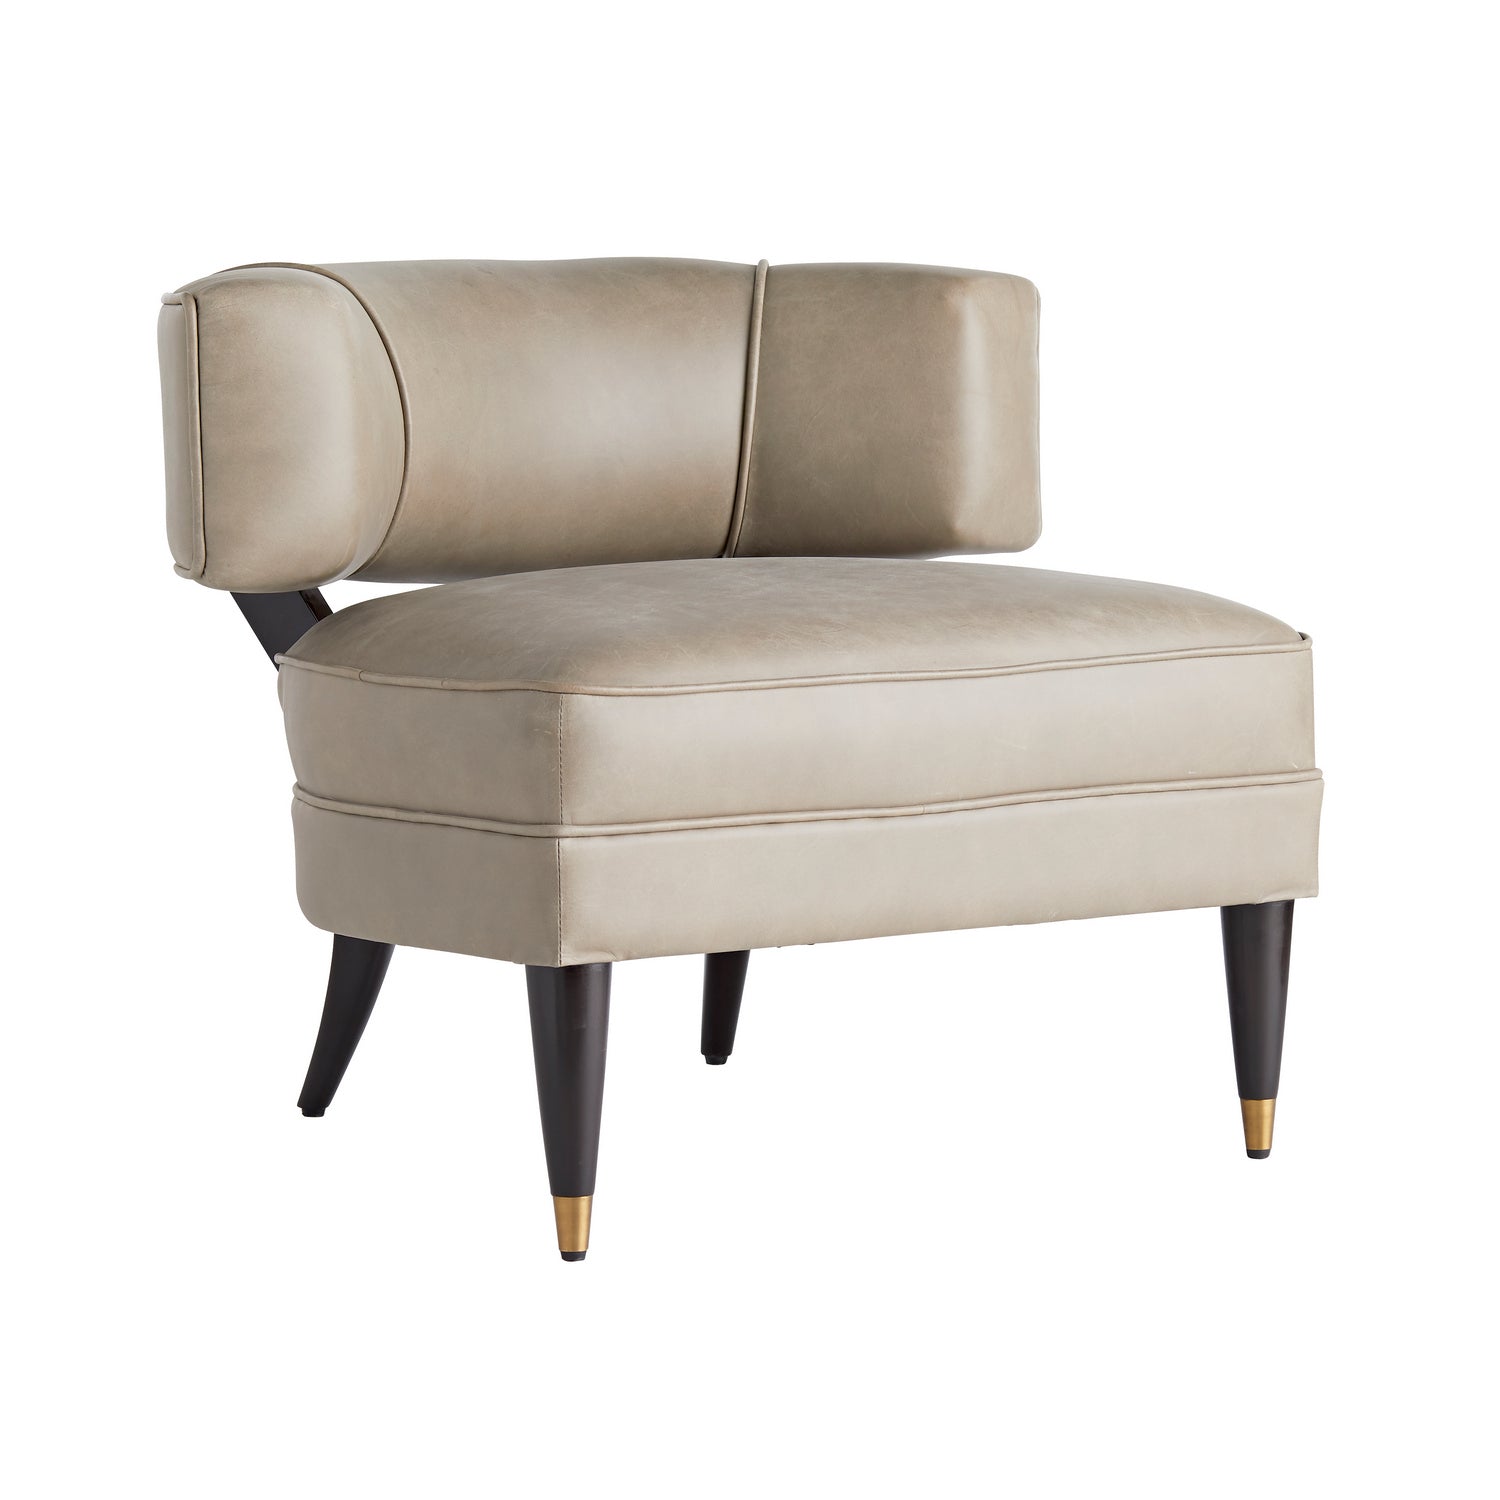 Chair from the Laurent collection in Morel finish